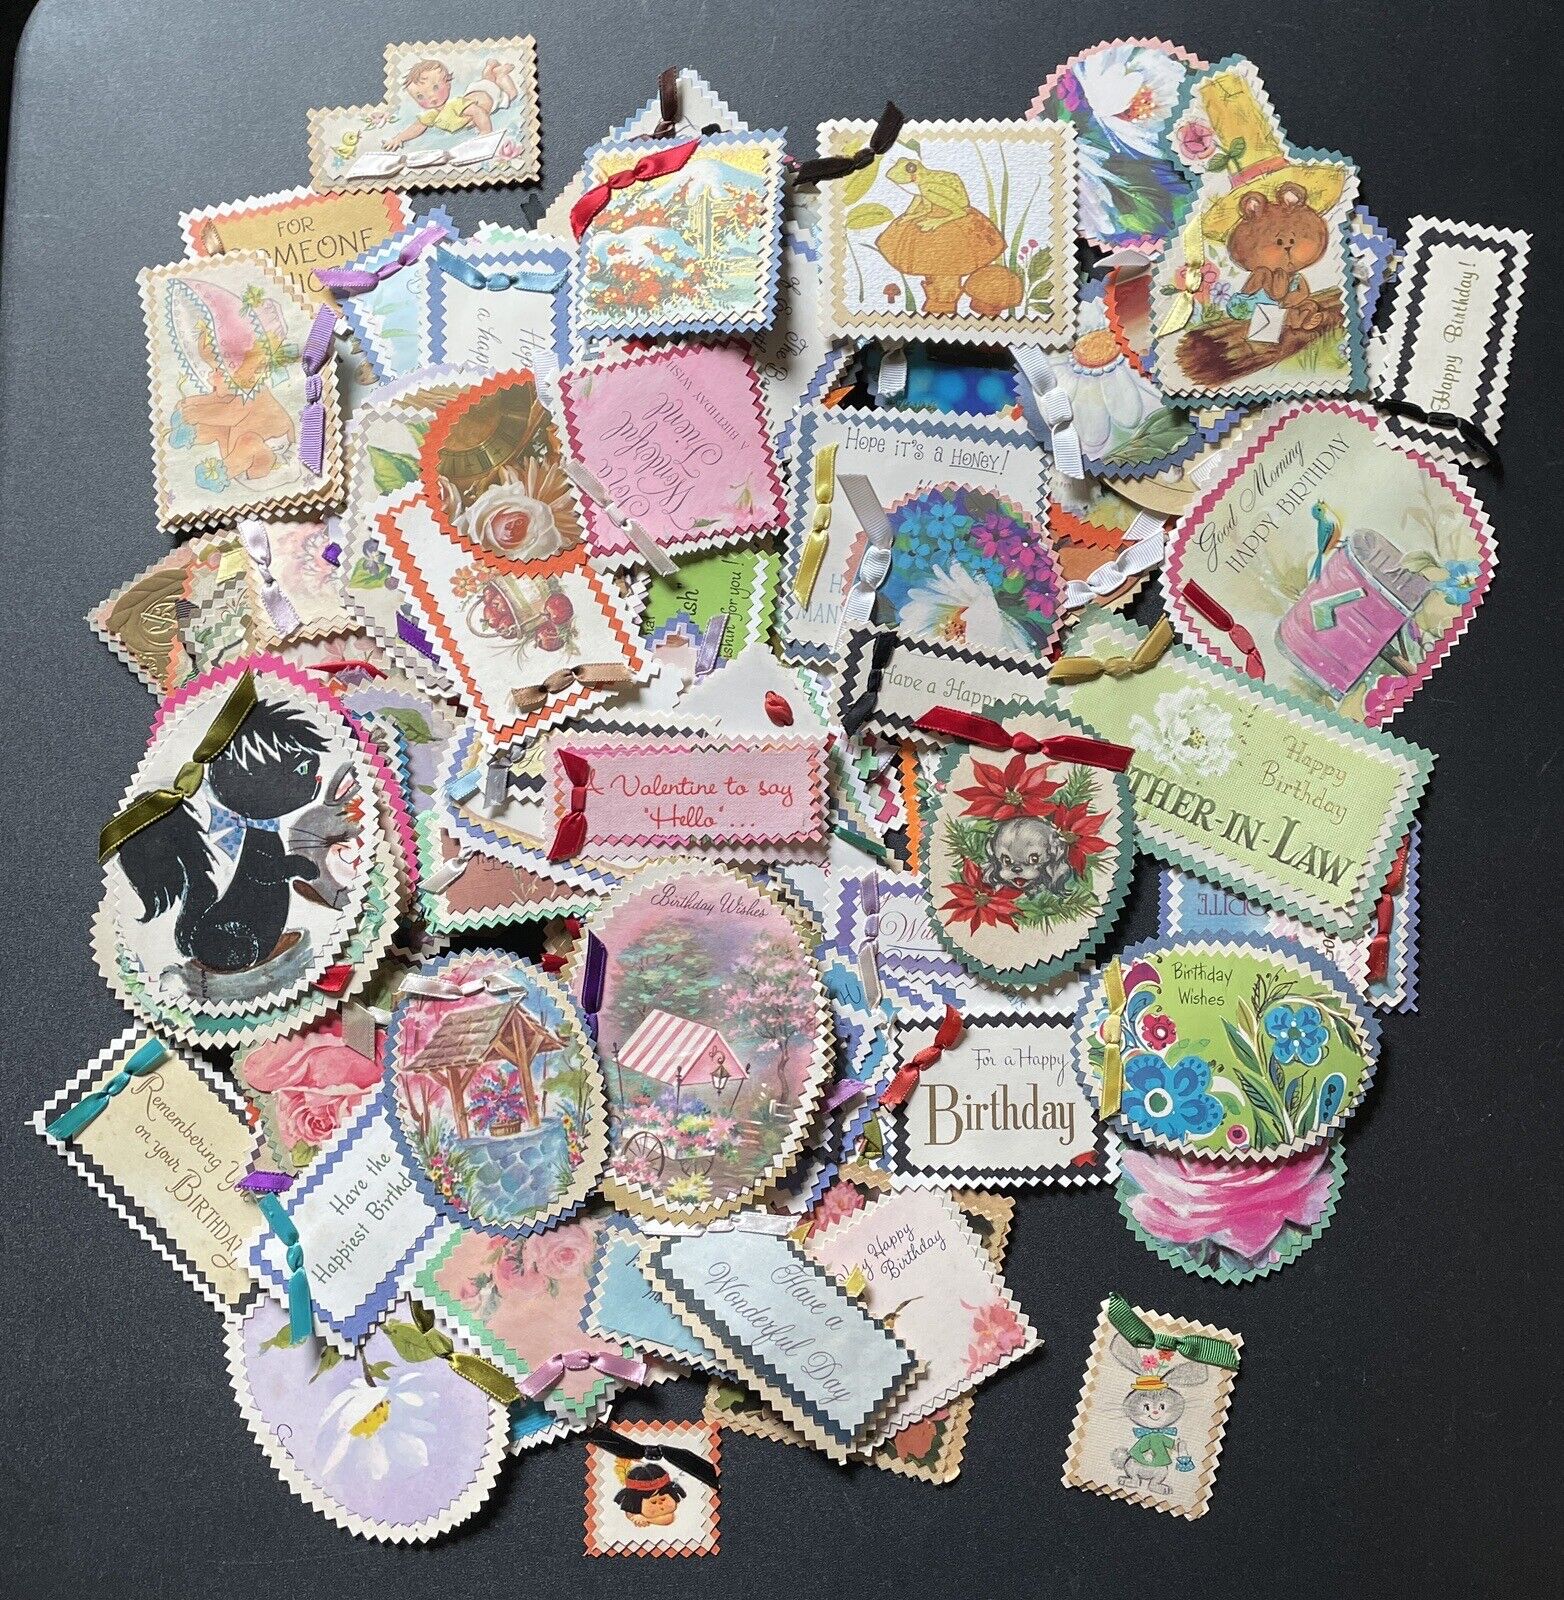 Huge Lot of 144 Vintage Upcycled Craft Greeting Card Gift Tags Notes Handmade